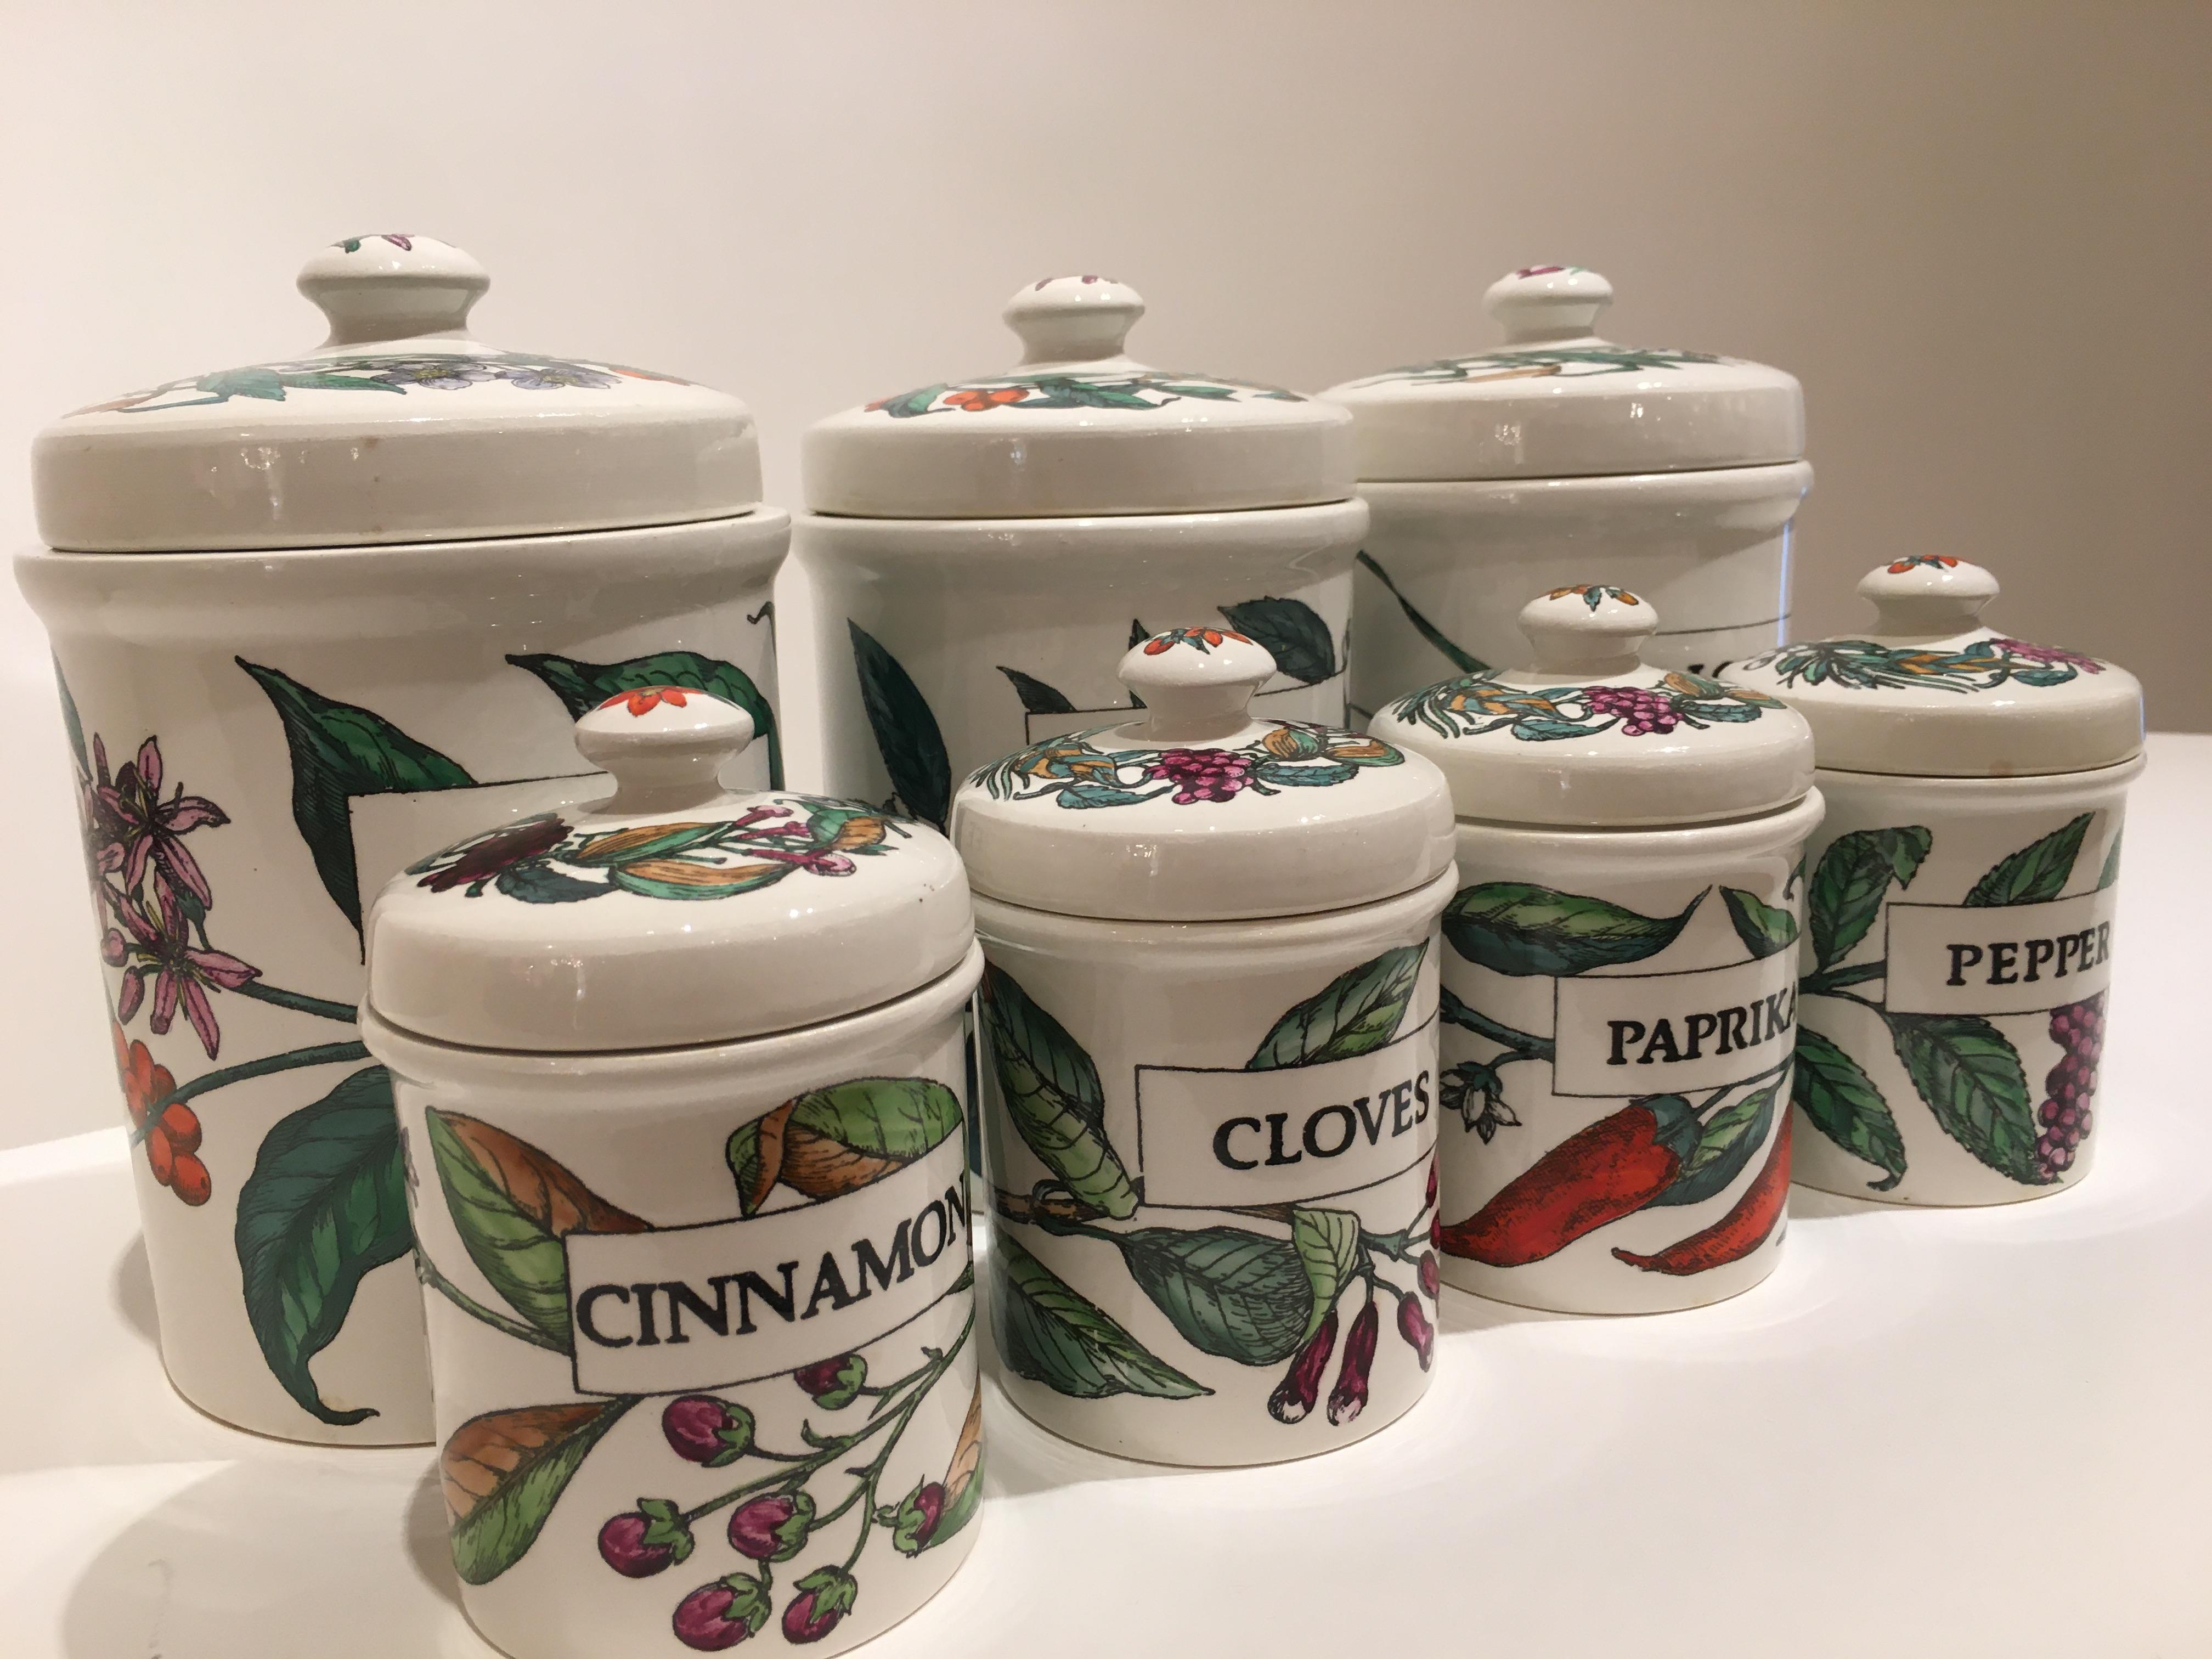 A rare set of beautifully colored decorative ceramic storage jars by Piero Fornasetti, circa 1960. Depicting seven different designs... tea, coffee, rice, paprika, cloves, cinnamon and pepper, these vintage jars were produced using decorative